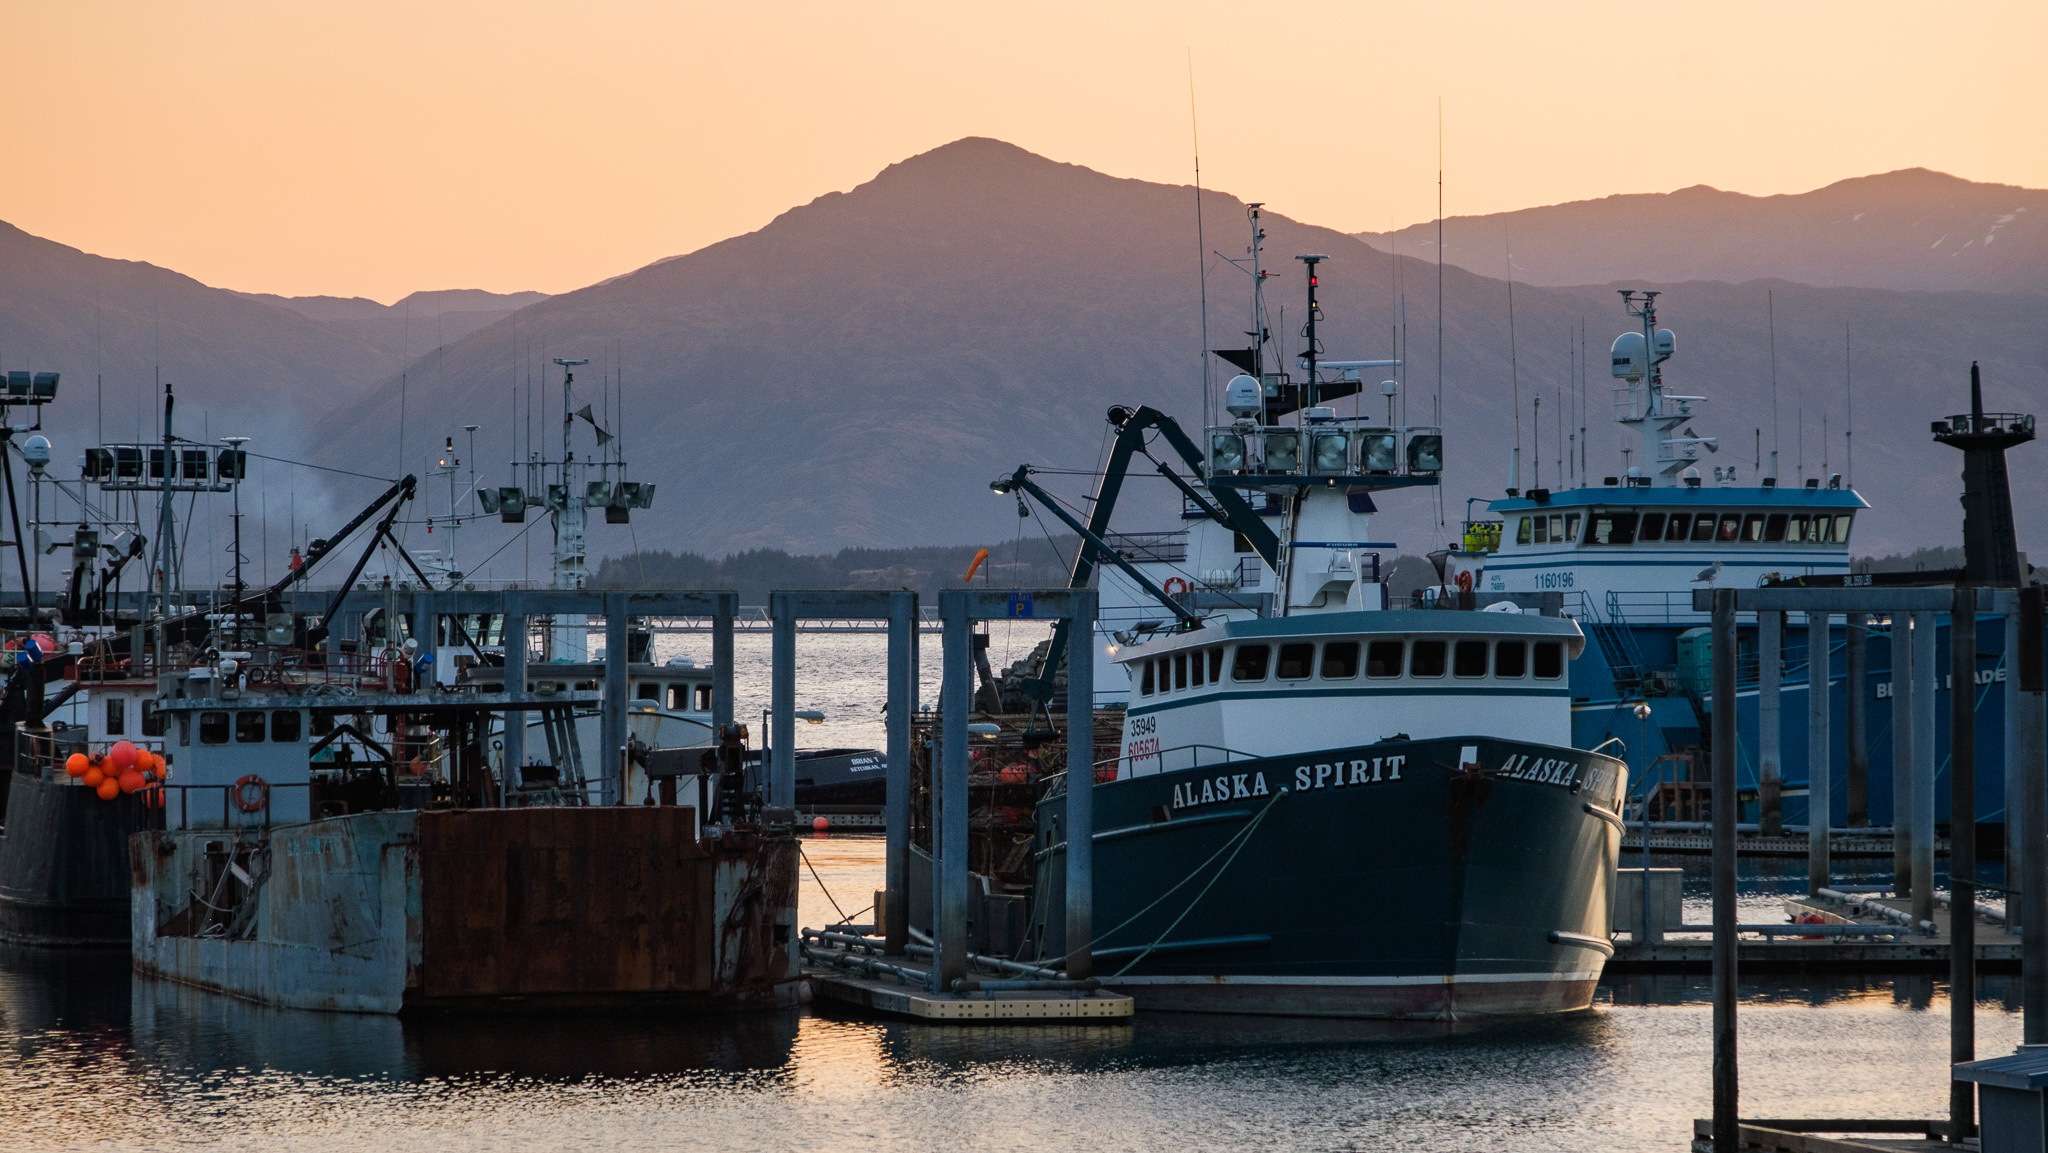 Seafood industry jobs disappeared from Alaska over five year